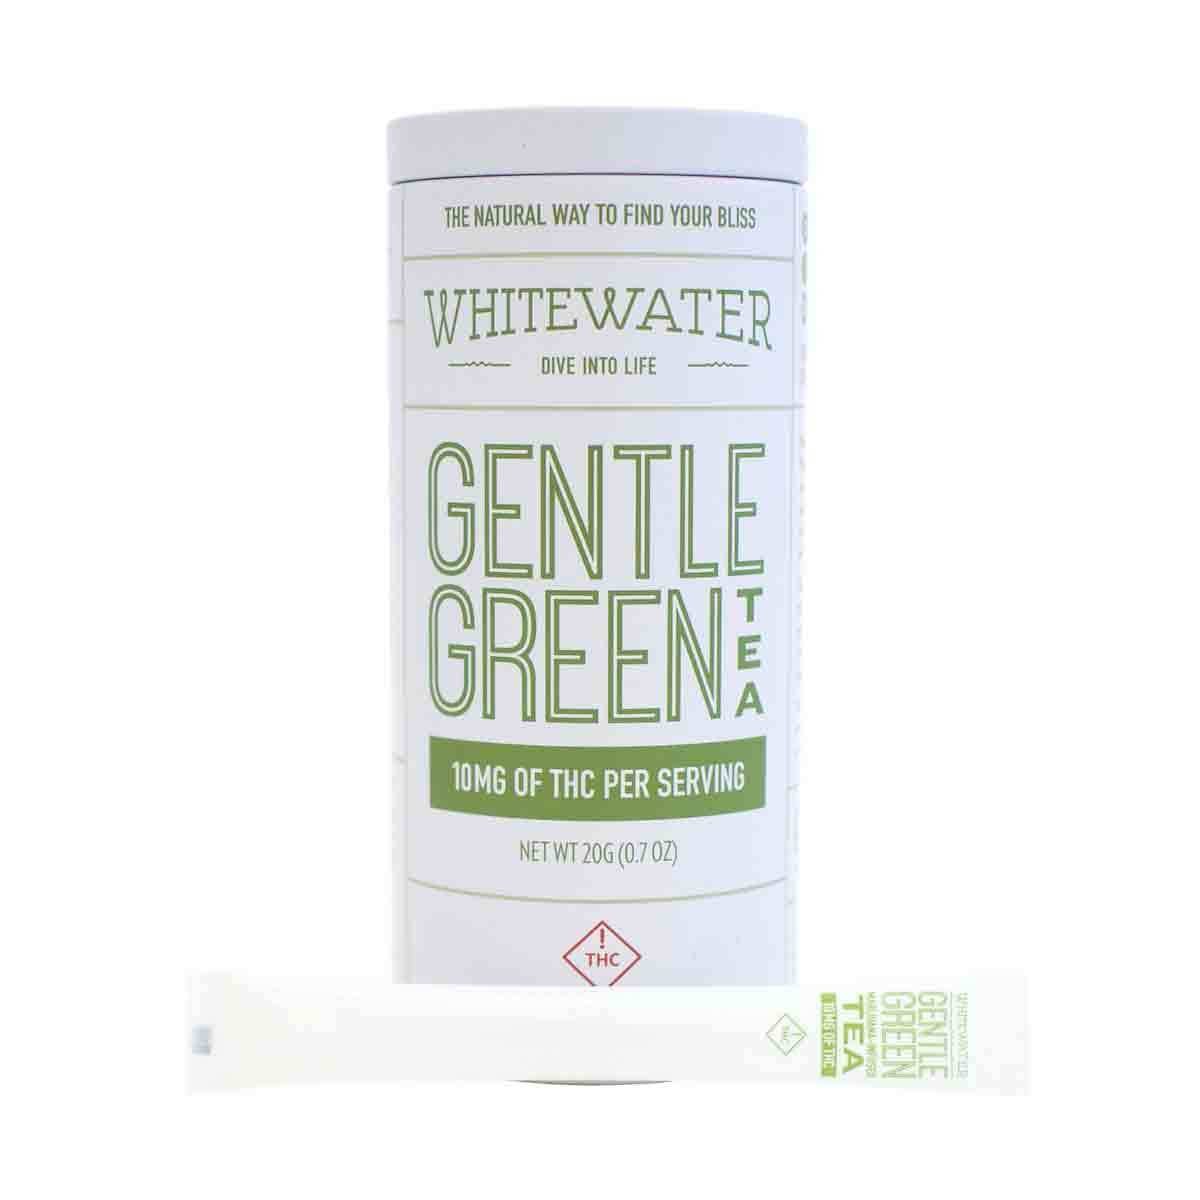 Whitewater Gentle Green, 10mg